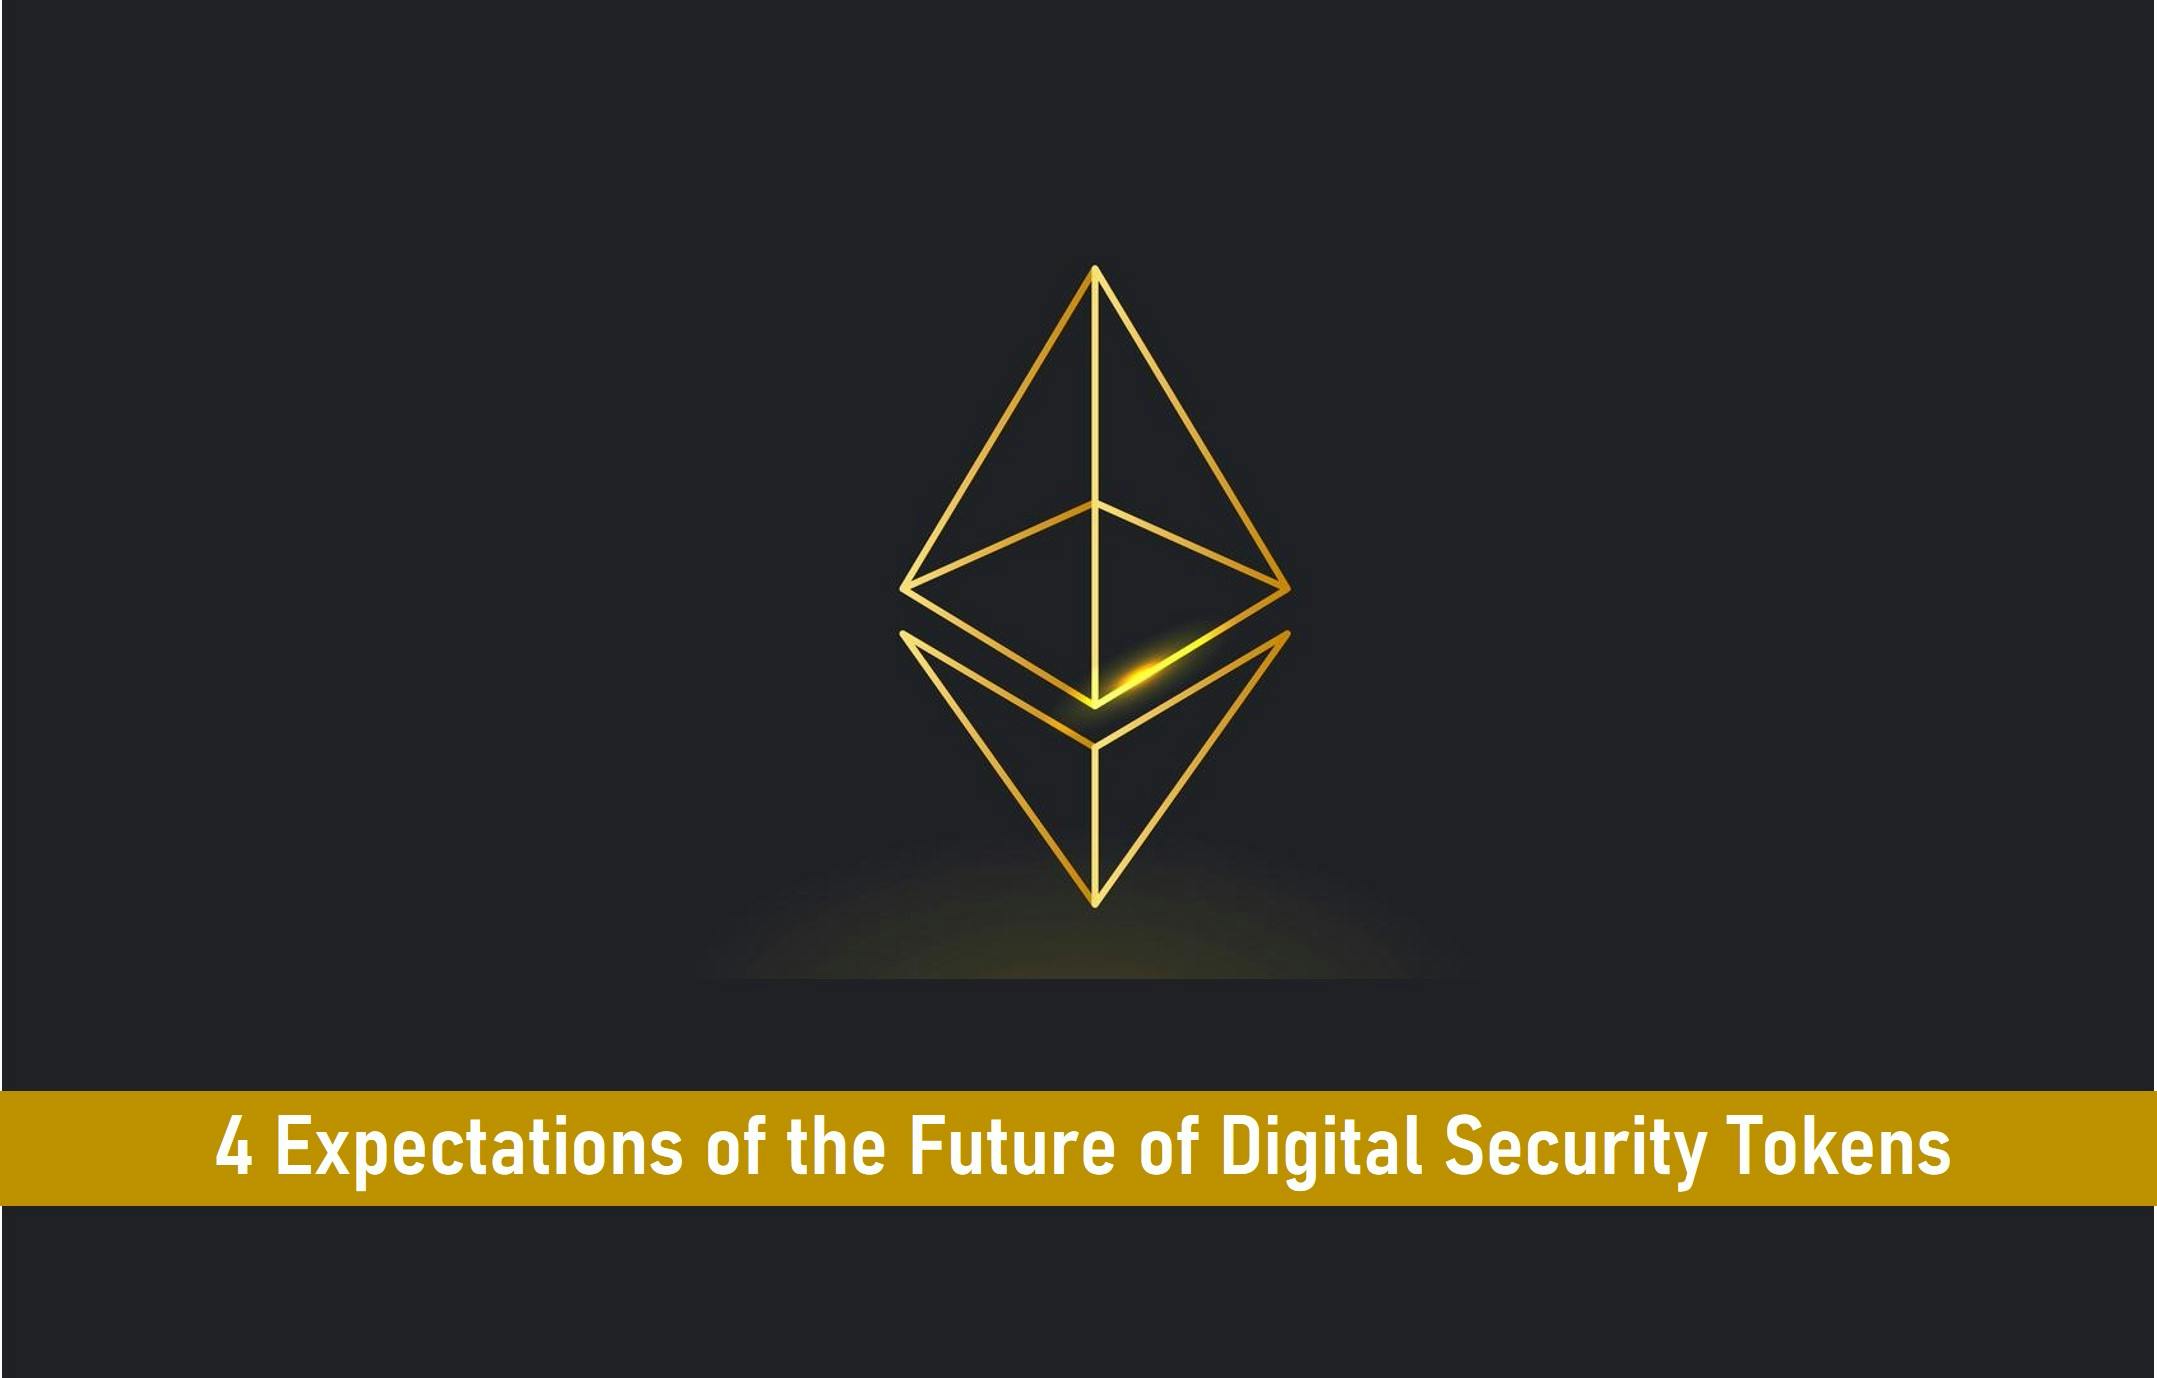 4 Expectations of the Future of Digital Security Tokens